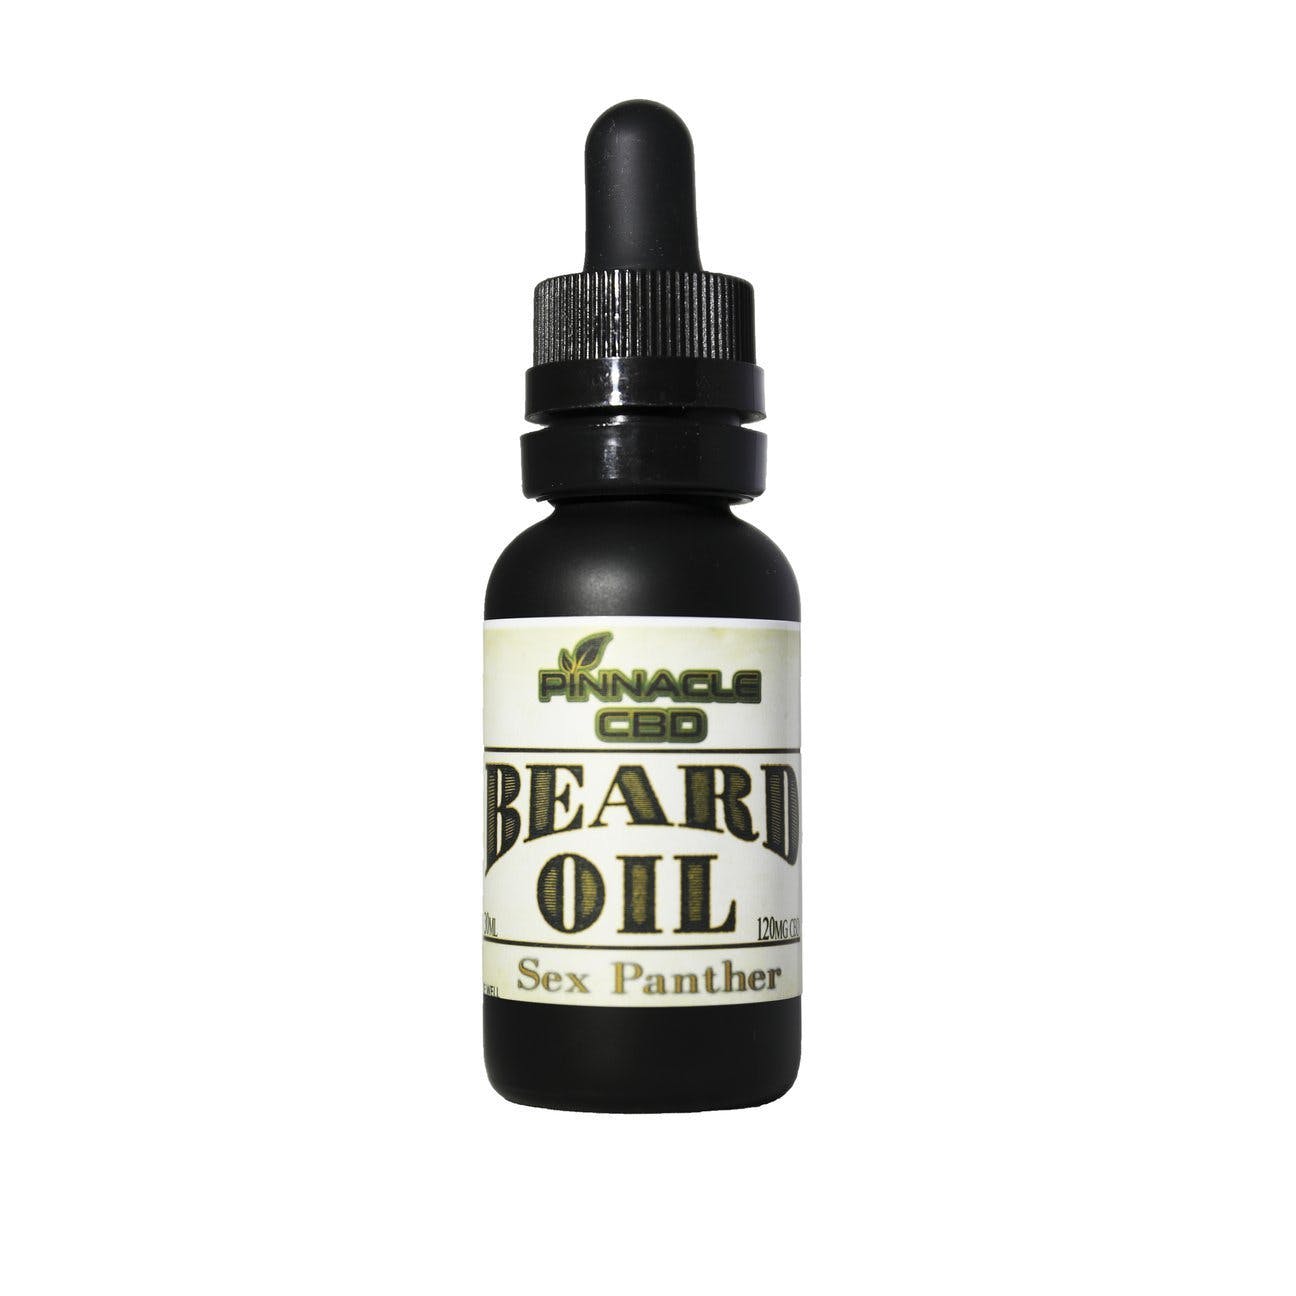 topicals-pinnacle-beard-oil-sex-panther-120mg